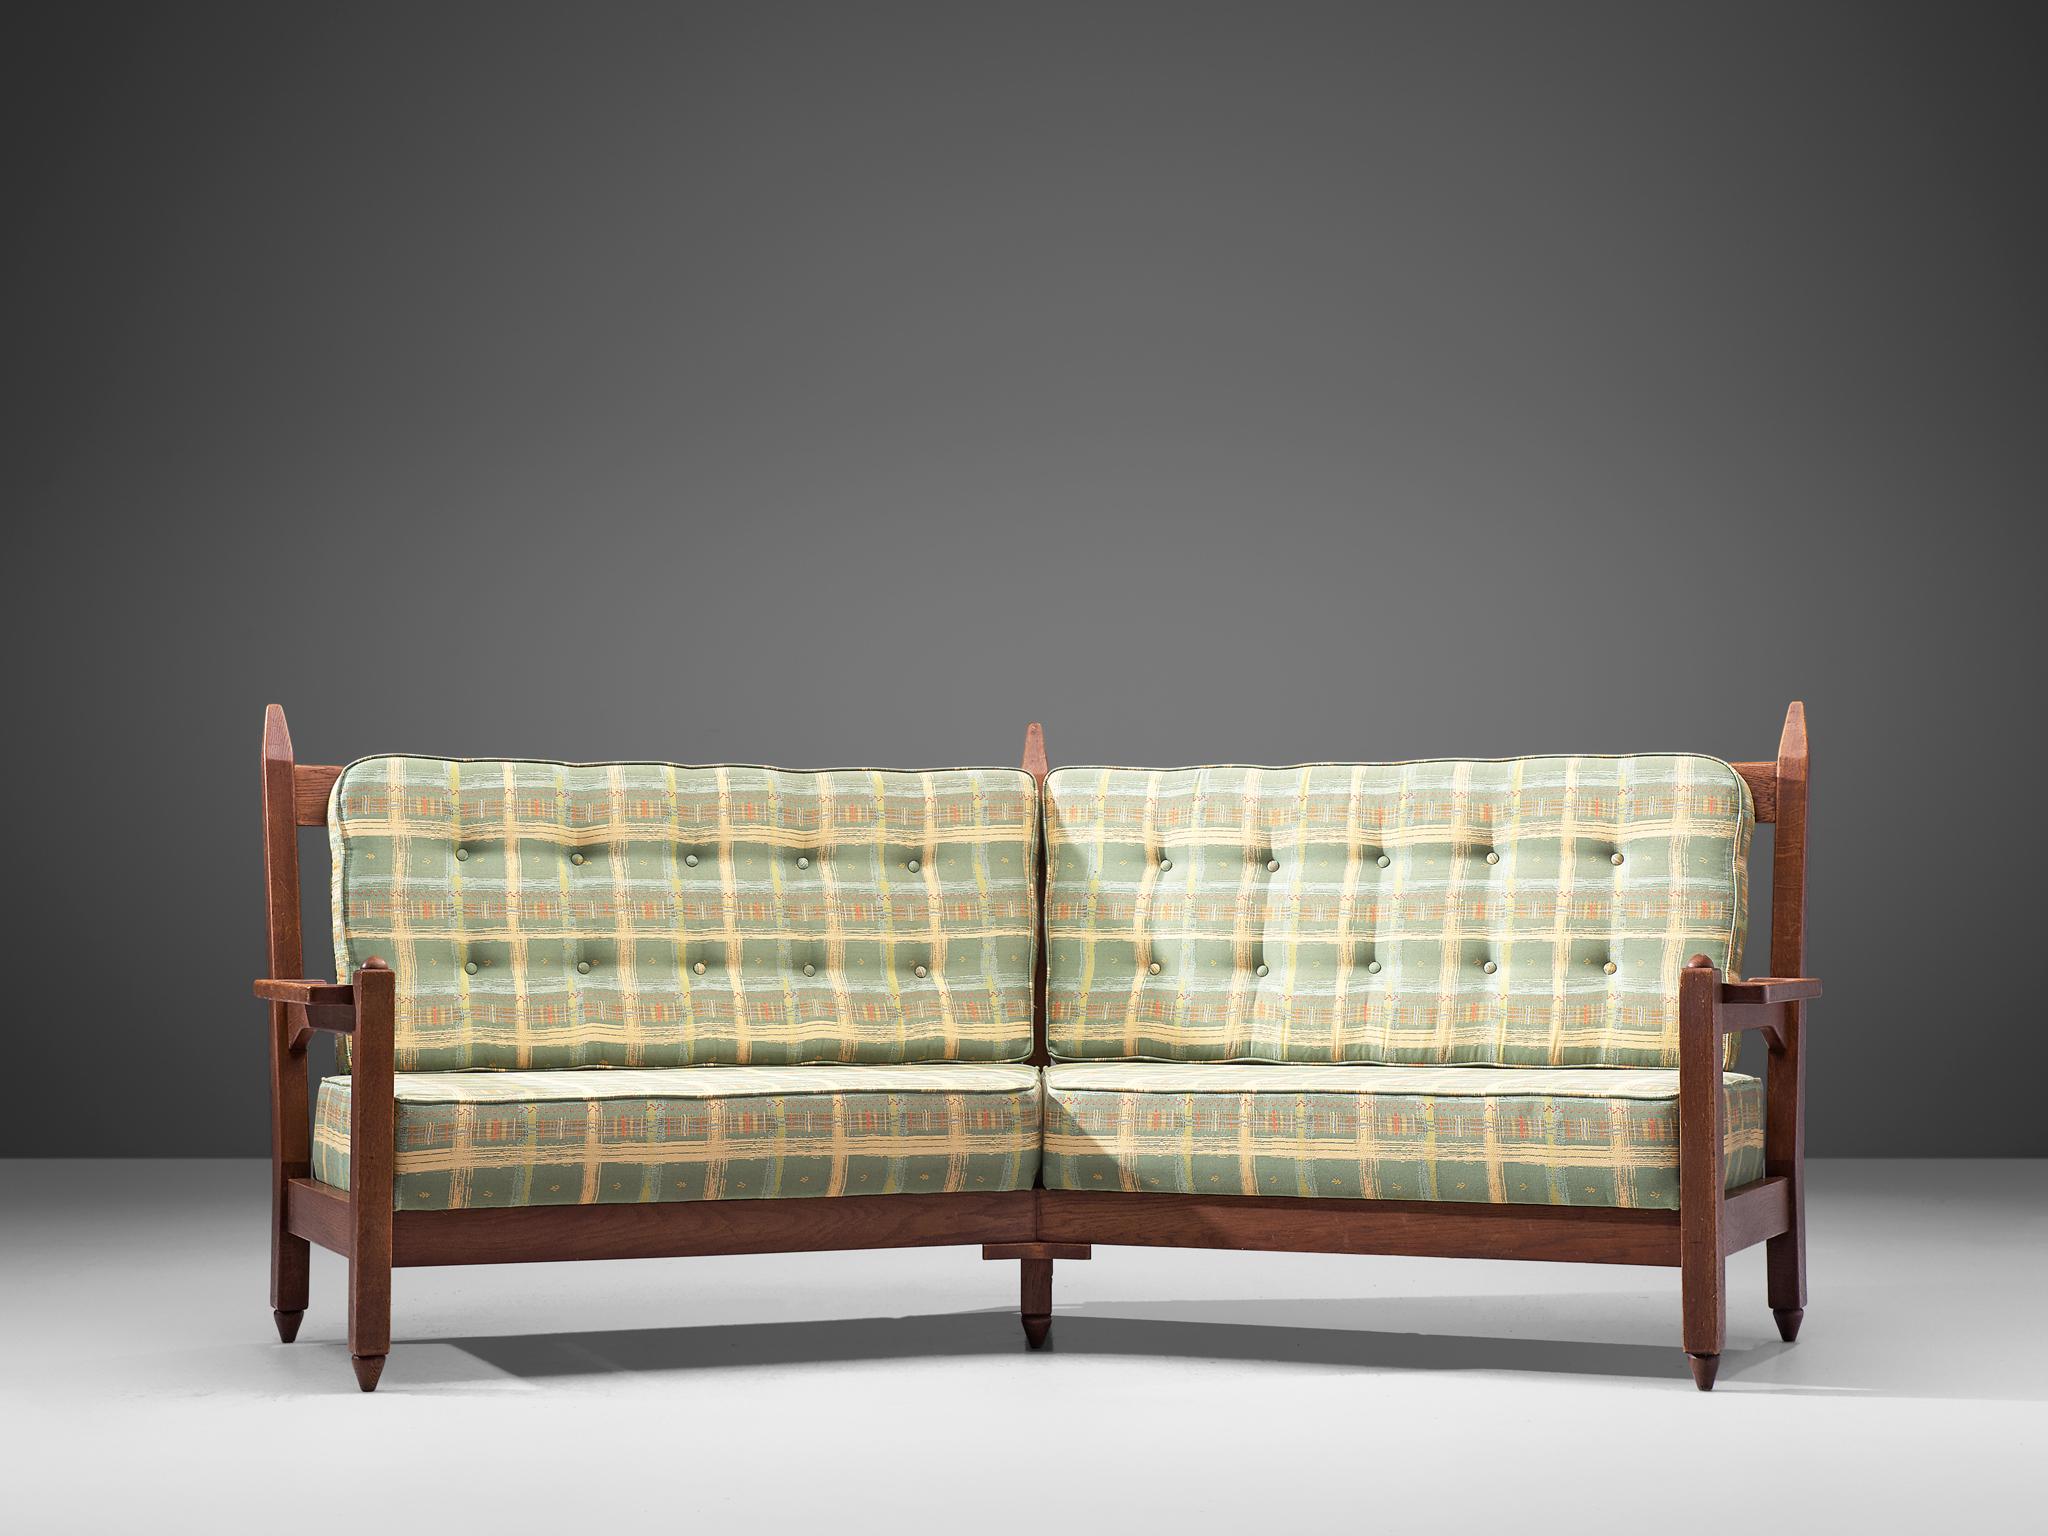 Guillerme et Chambron for Votre Maison, curved sofa, solid oak and fabric, France, 1960s.

This sculptural carved oak sofa is designed by Guillerme and Chambron. The design duo is known for their sculptural, crafted solid oak furniture. This